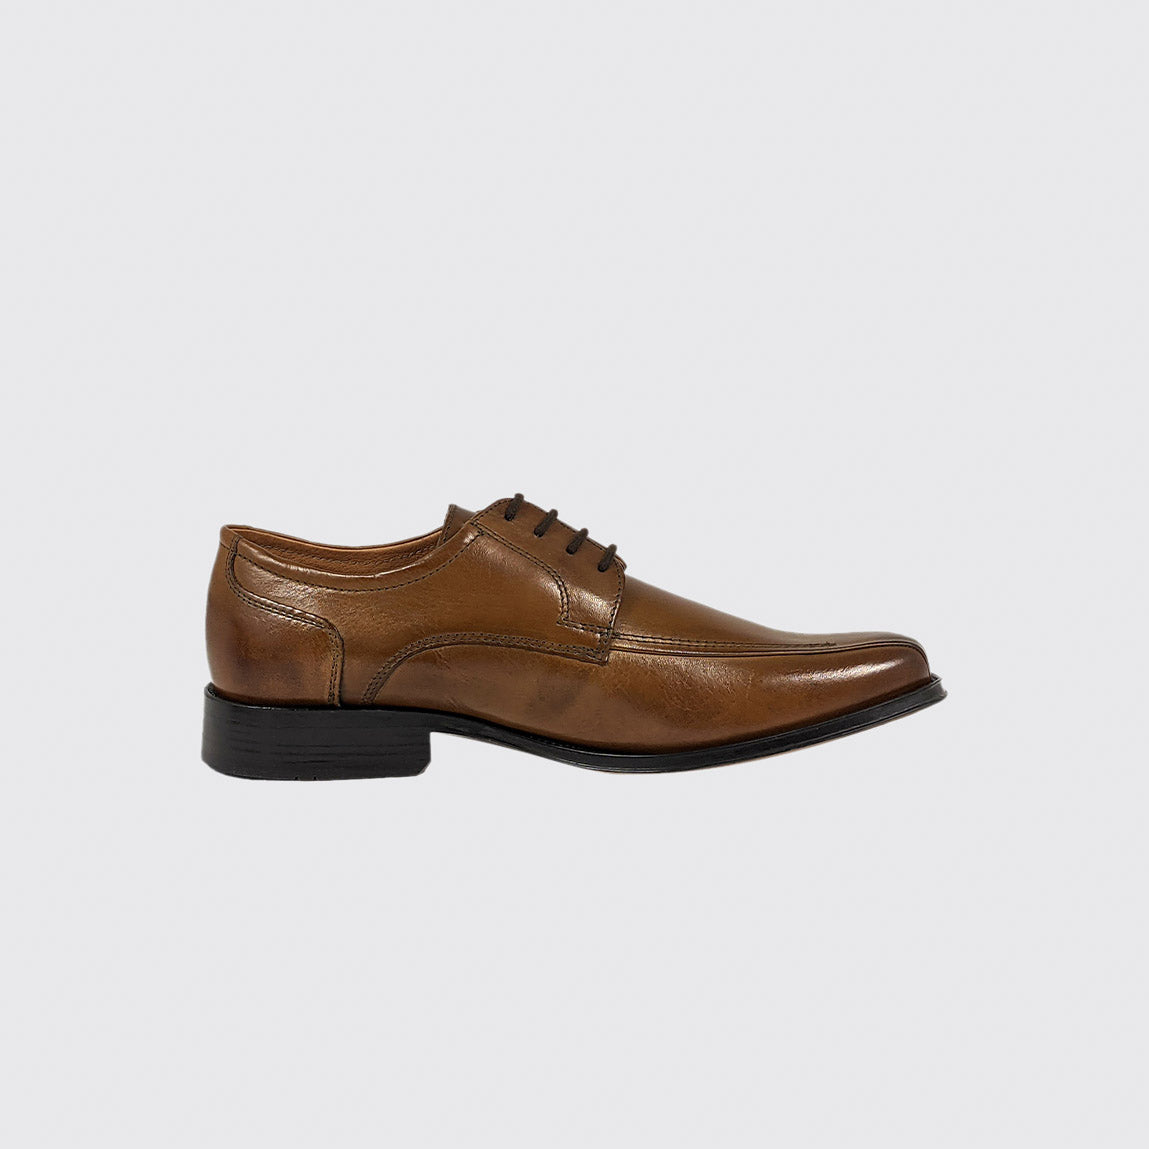 Side image of the Davey Tan, showing the classic leather and tramline detail.